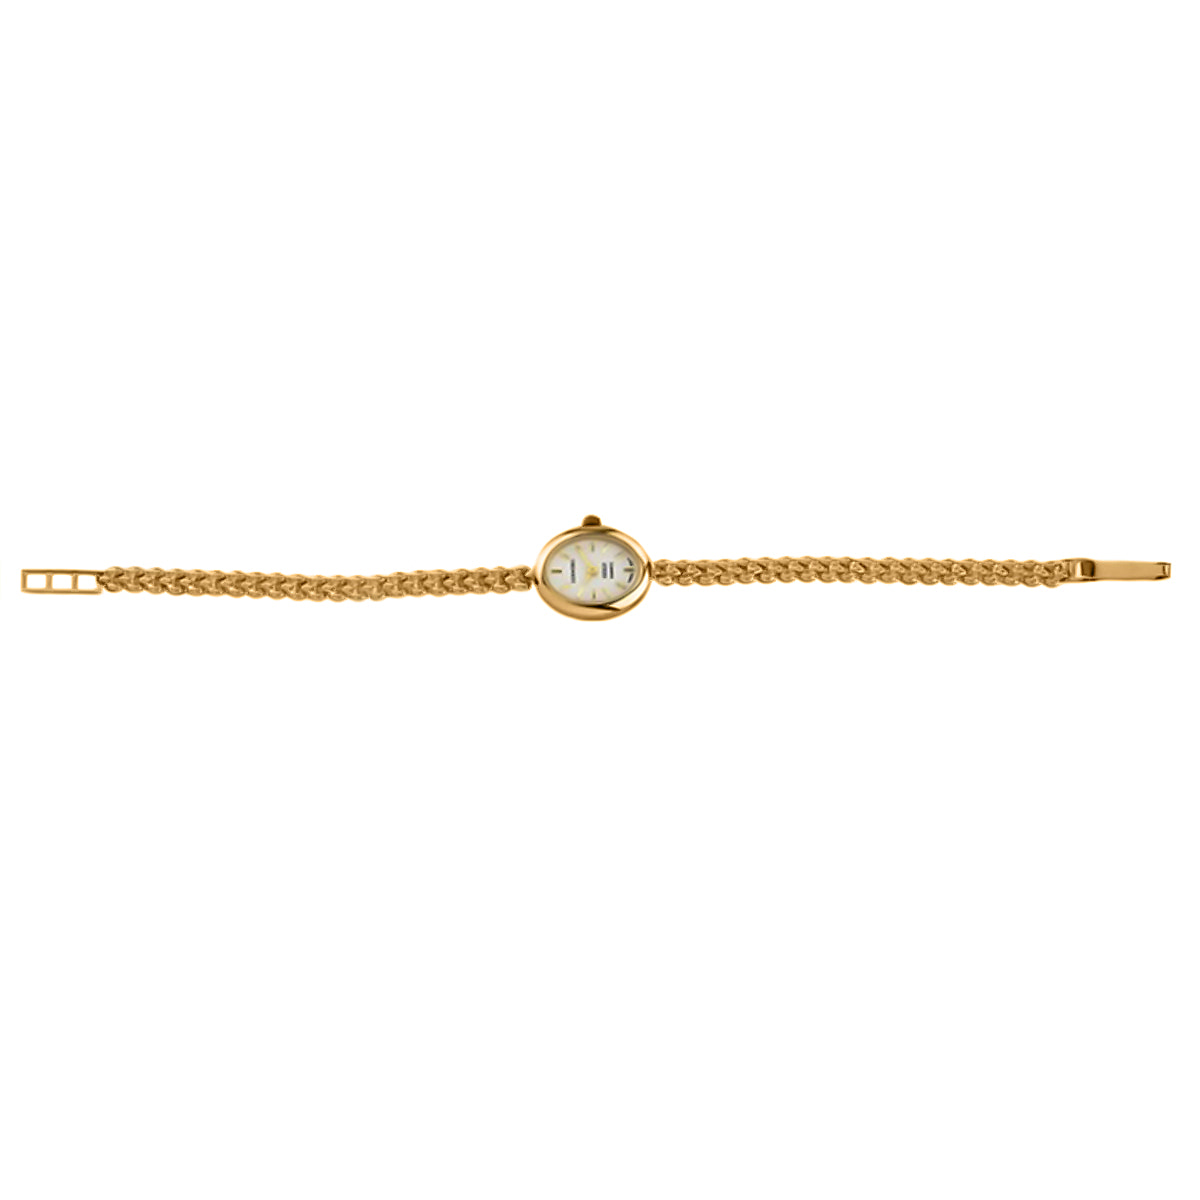 9K Yellow Gold Swiss Movt. Water Resistant Watch in Panther Chain Strap (Size 7 - 7.5) Gold Wt. 8.31 Grms